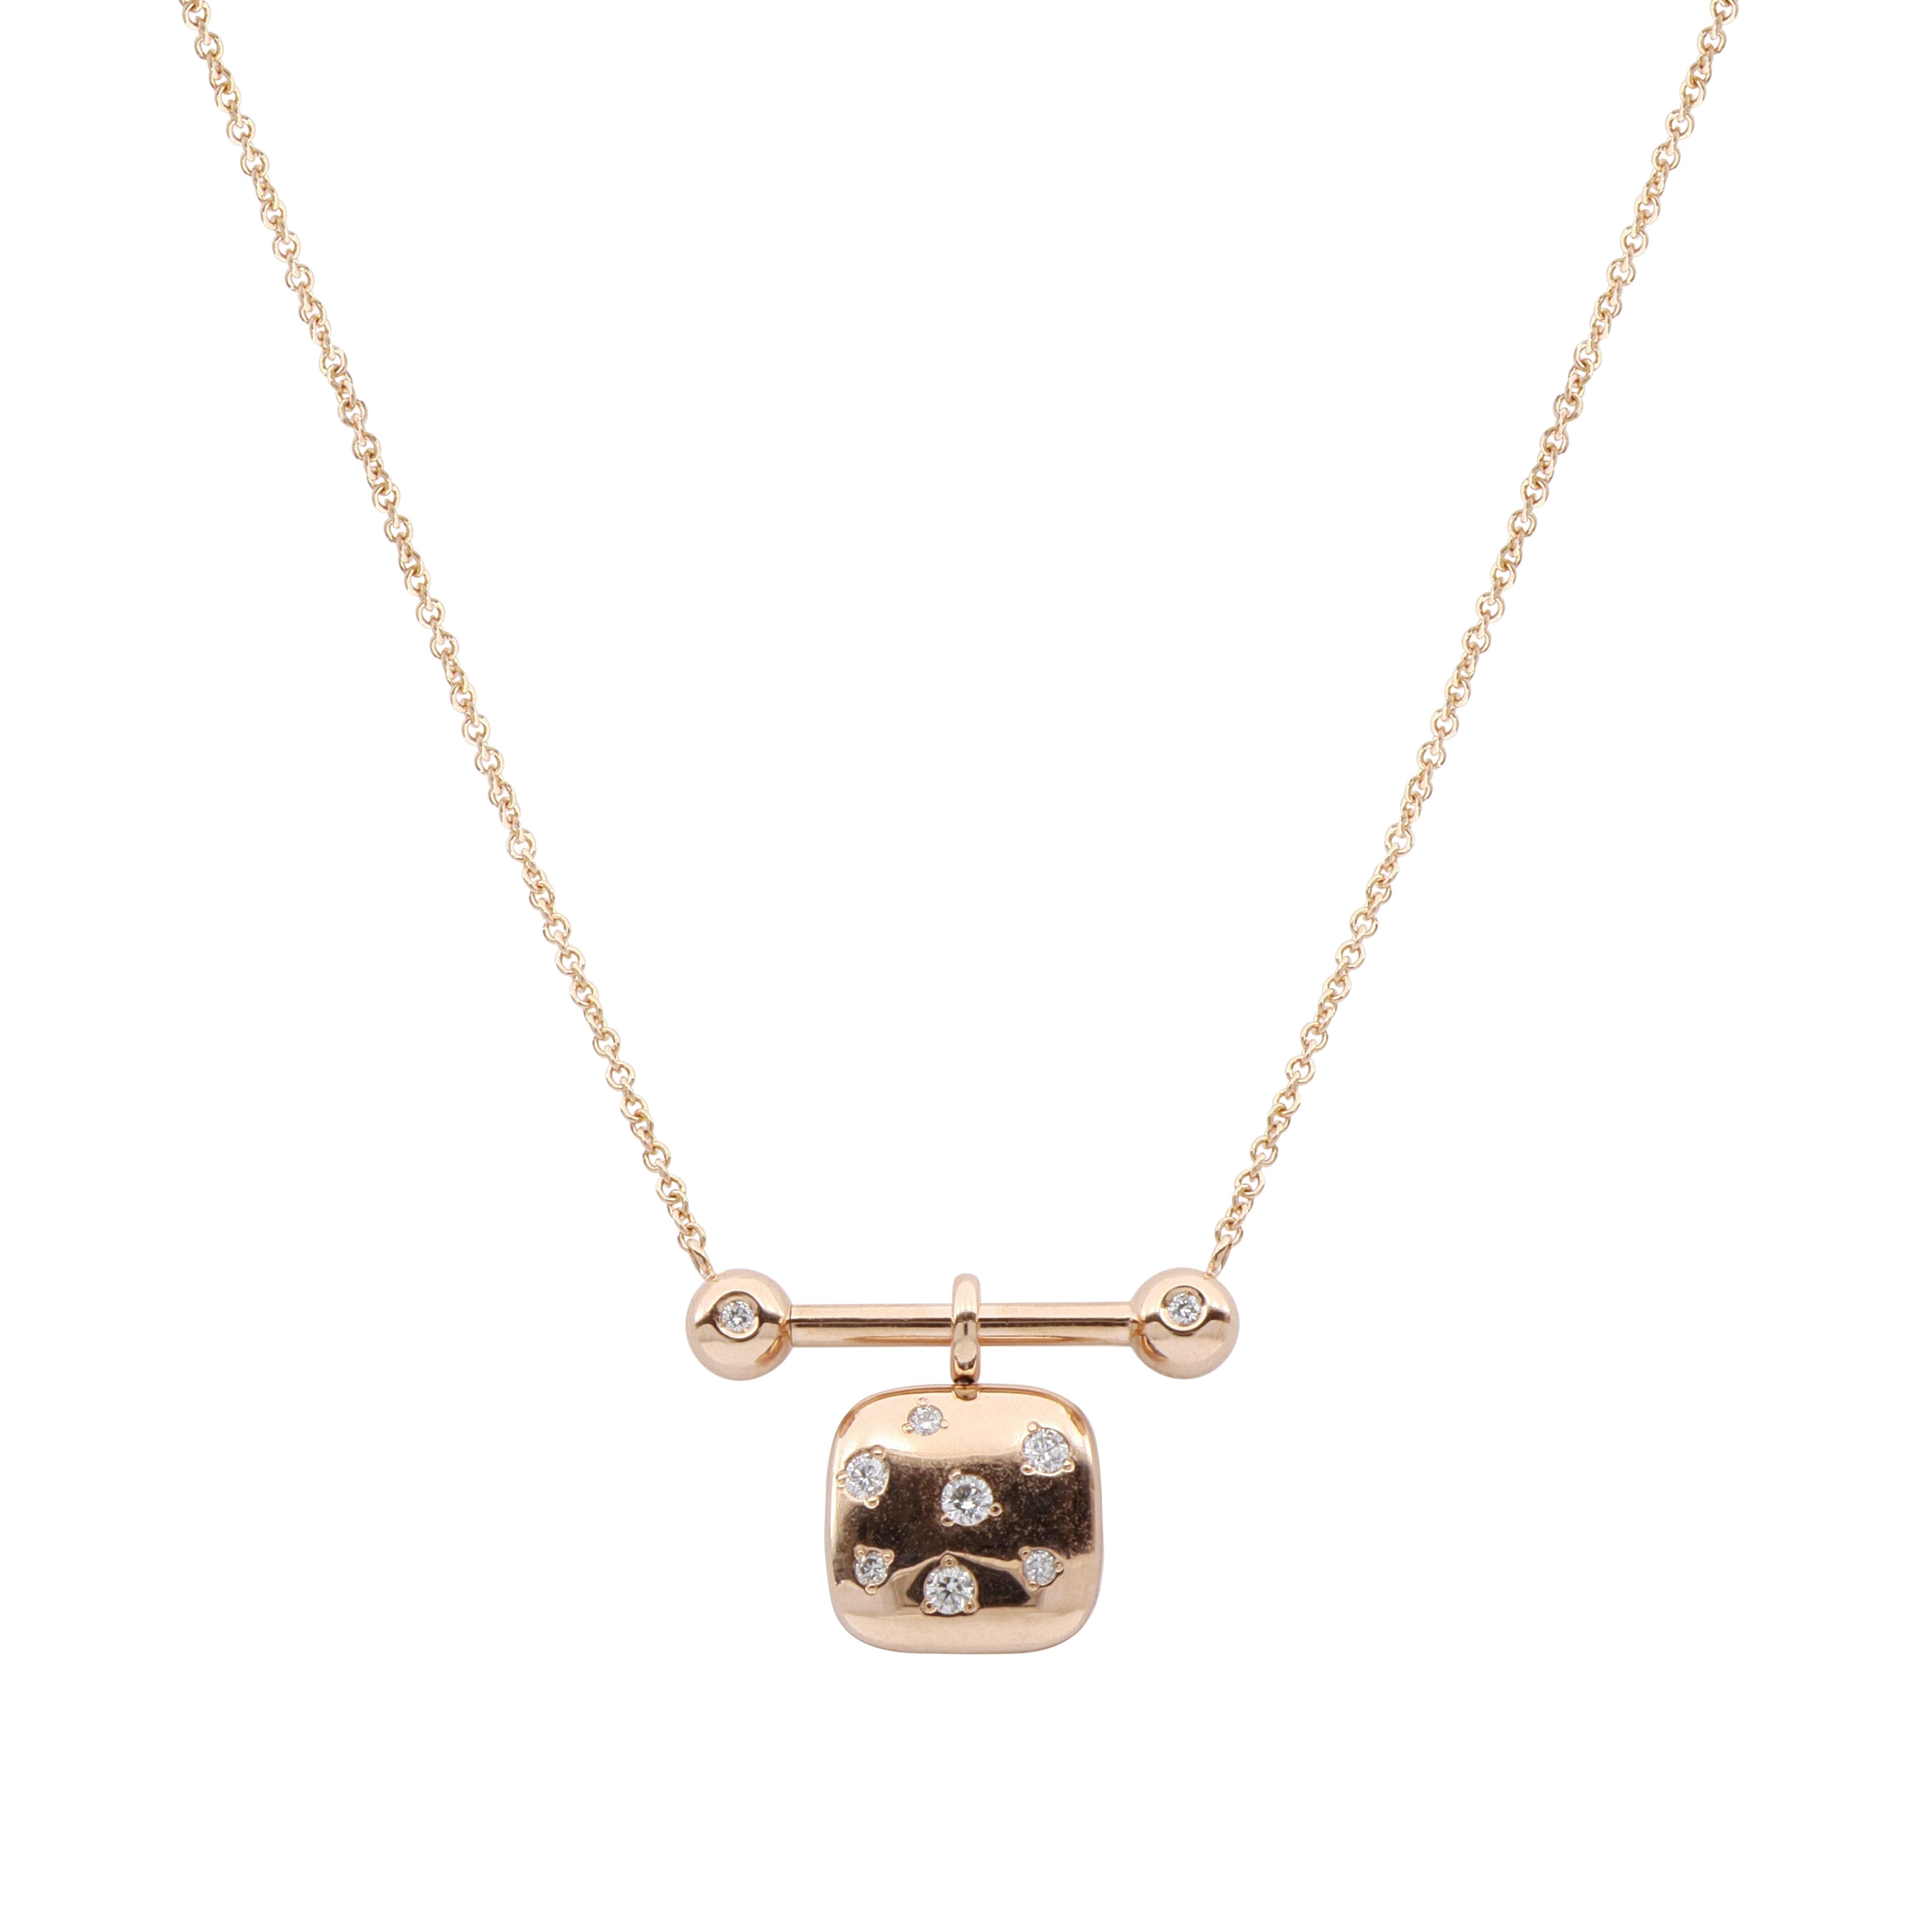 This unique, modern necklace is handcrafted in 18 Kt rose gold. The fine chain holds a polished gold bar design featuring two white brilliant-cut diamond accents. A reversible square pendant dangles from the center showcasing a black and white